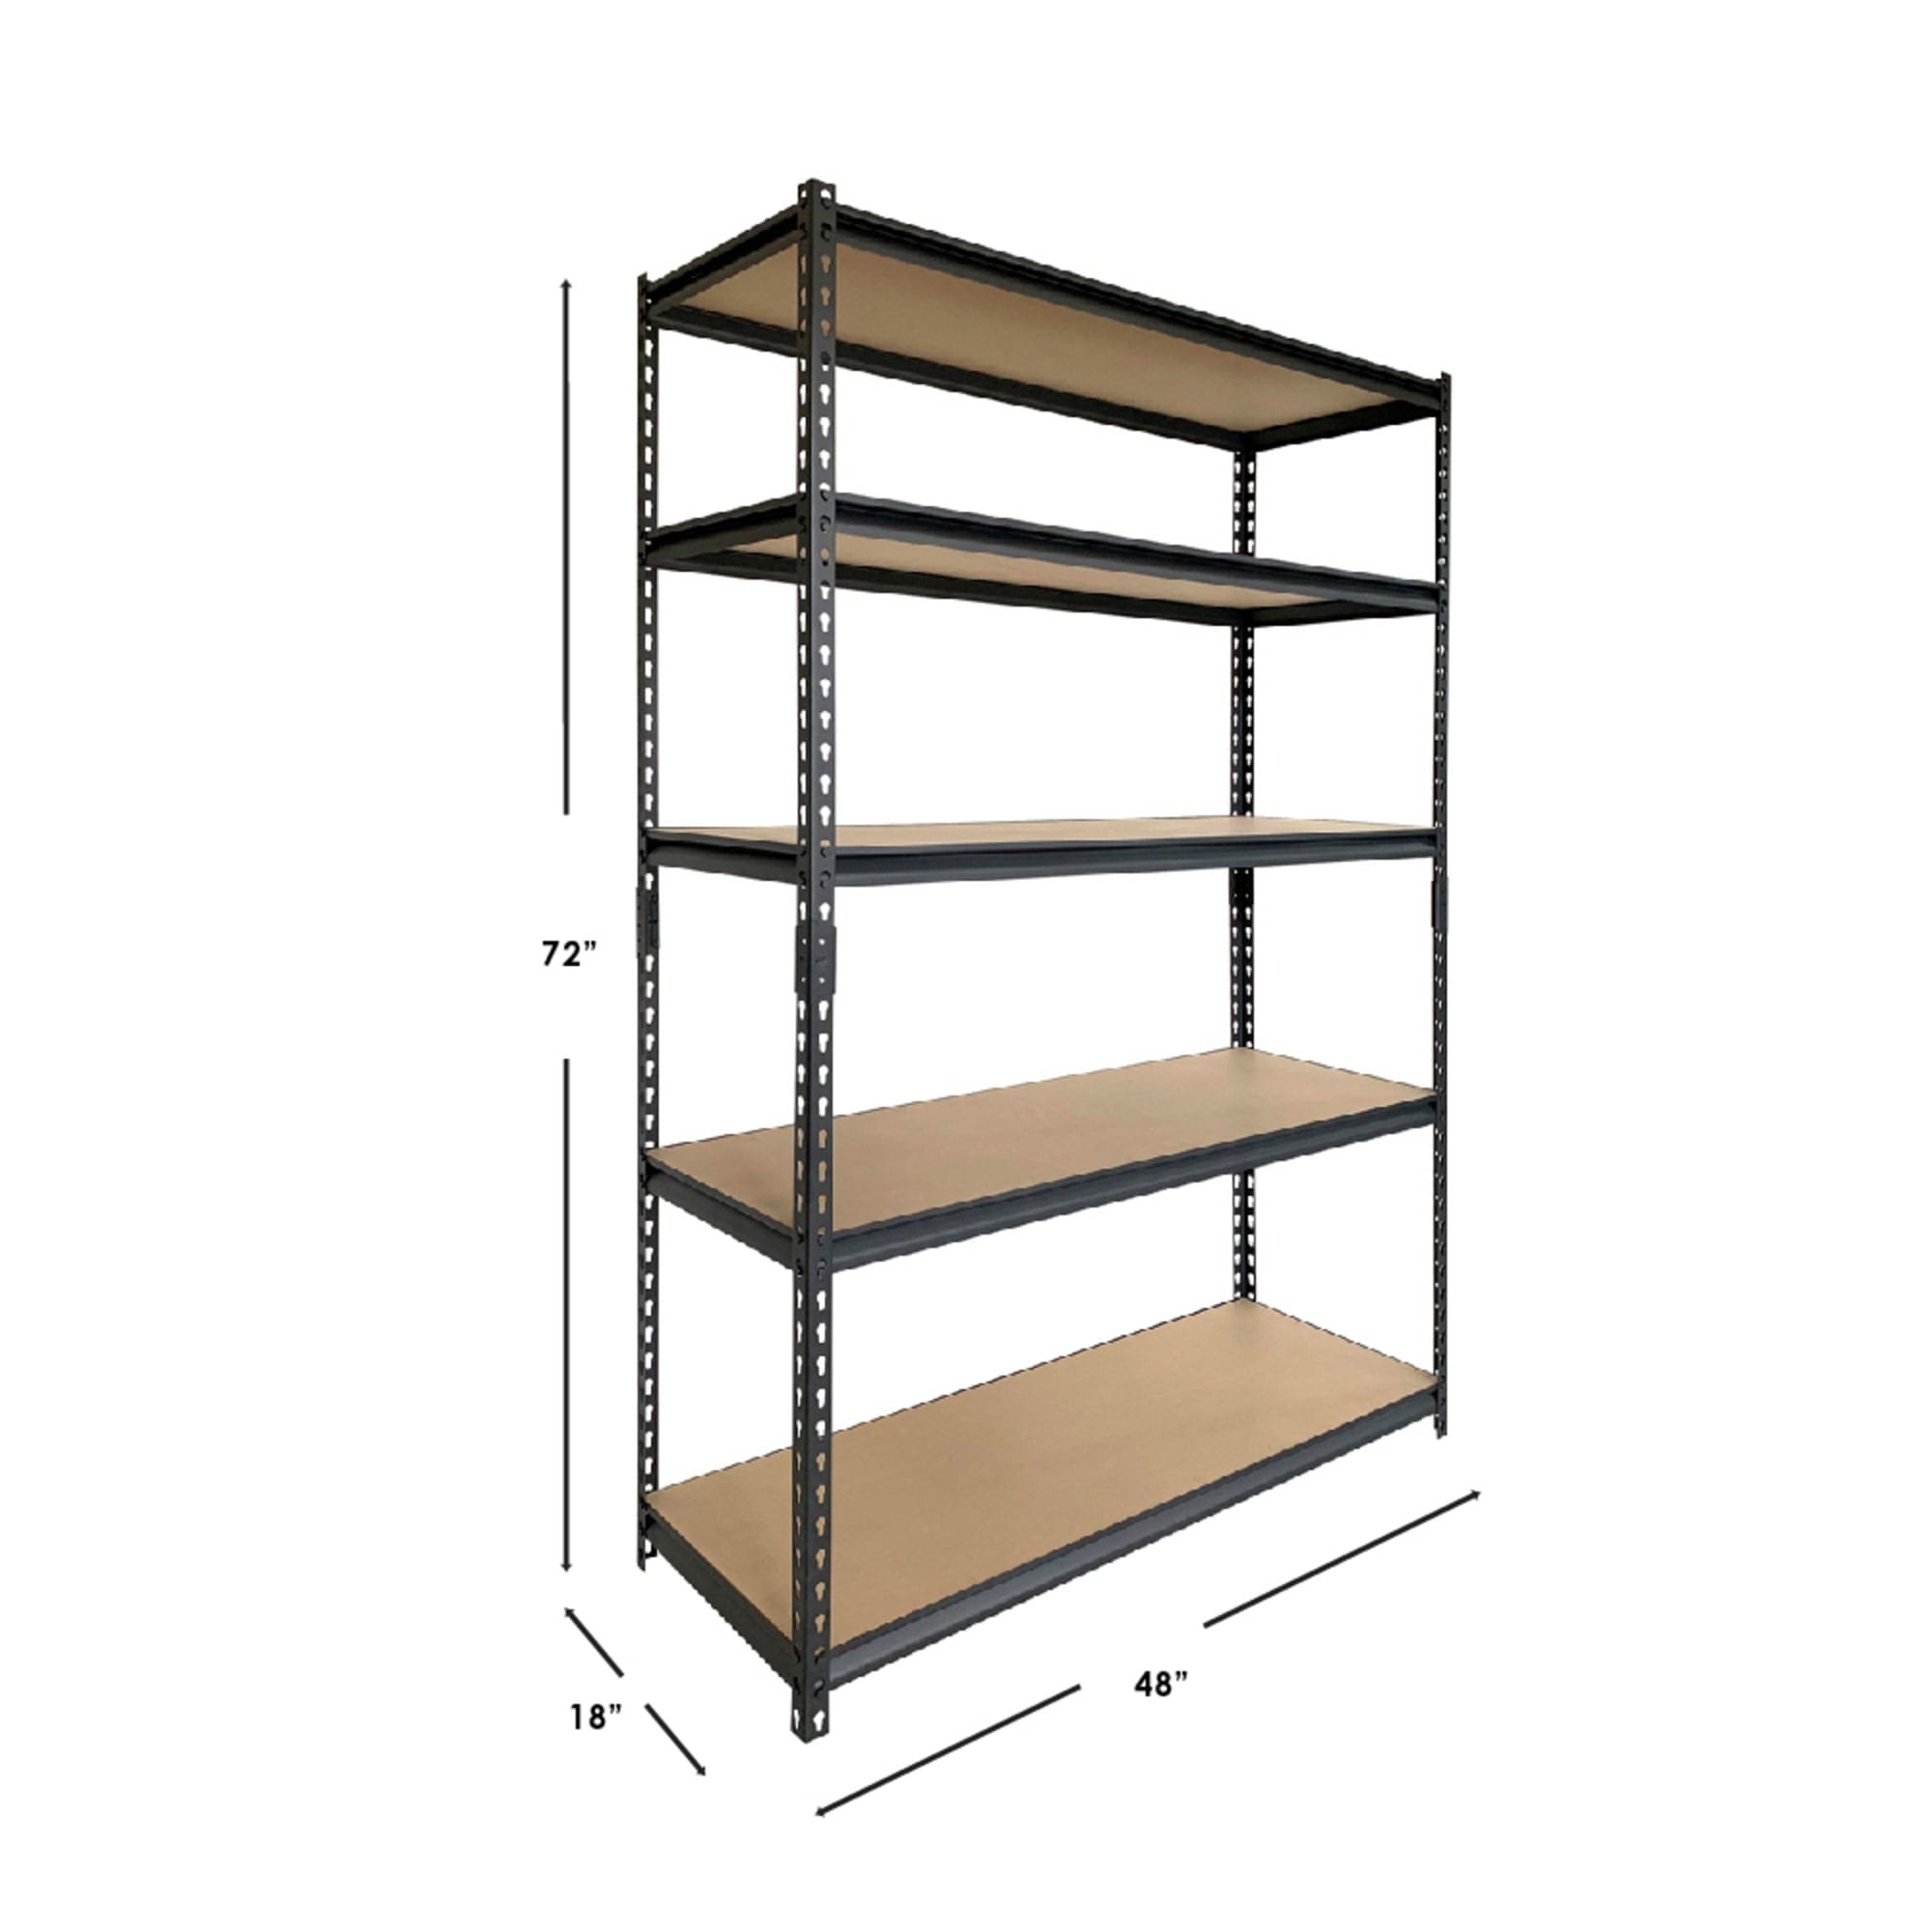 Home Basics Quick Assembly 5 Tier Heavy Duty Shelf, (47" x 72"), Black
 $100.00 EACH, CASE PACK OF 1